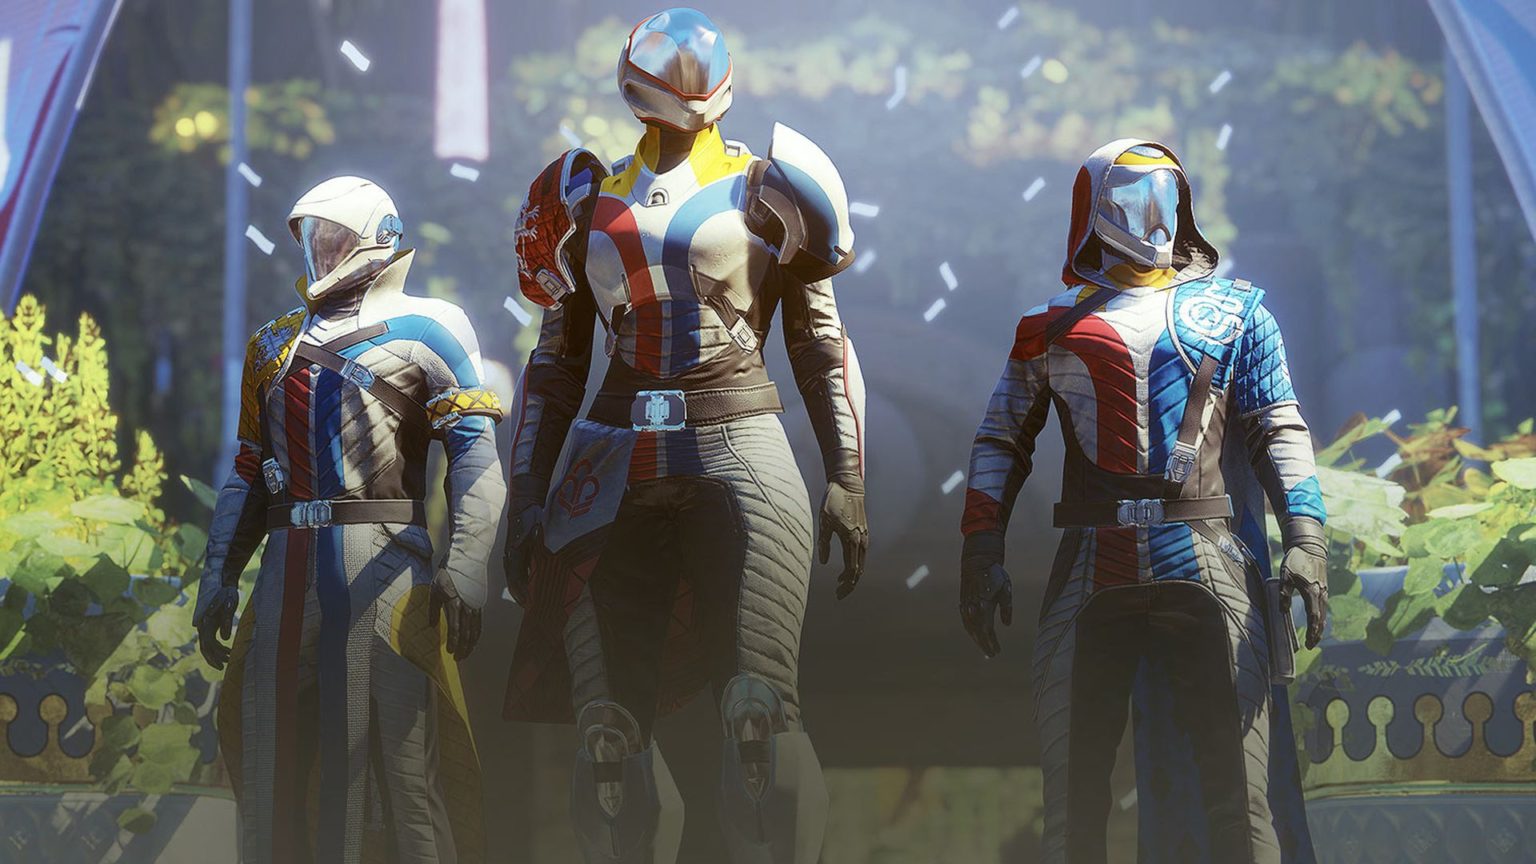 Destiny 2 Guardian Games Showcased in First Trailer, Starts April 21st